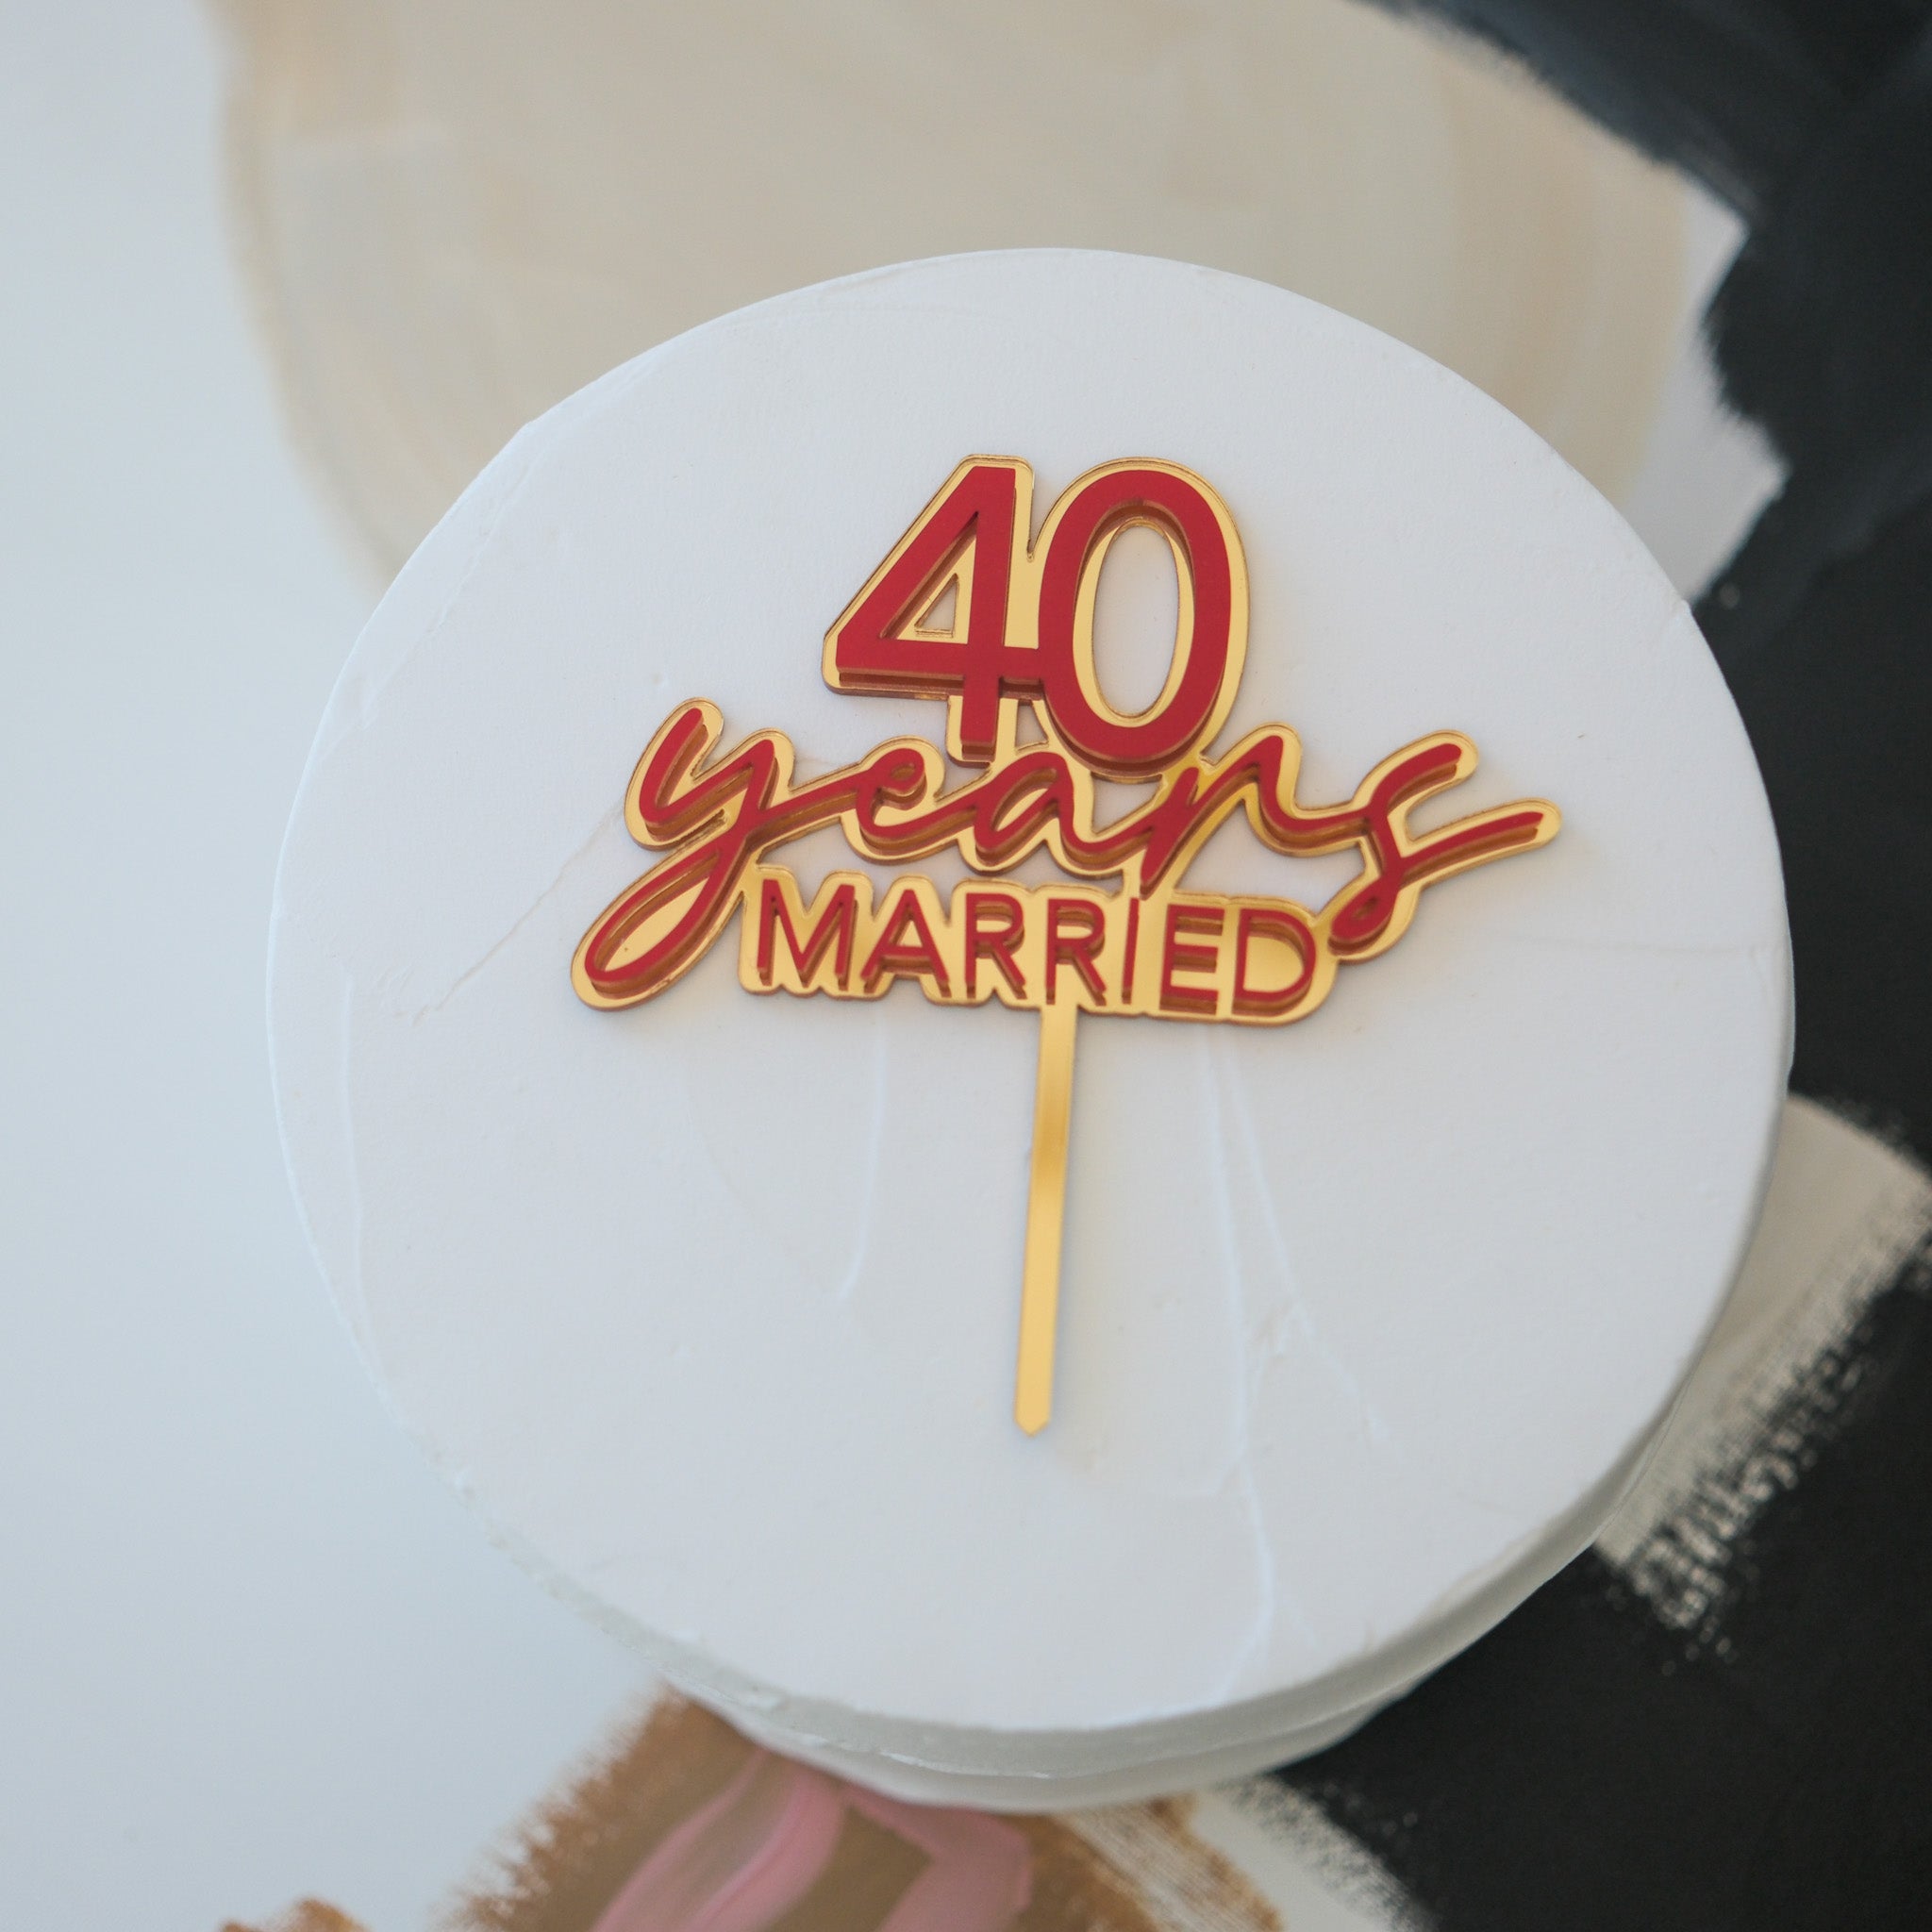 40 years married cake topper